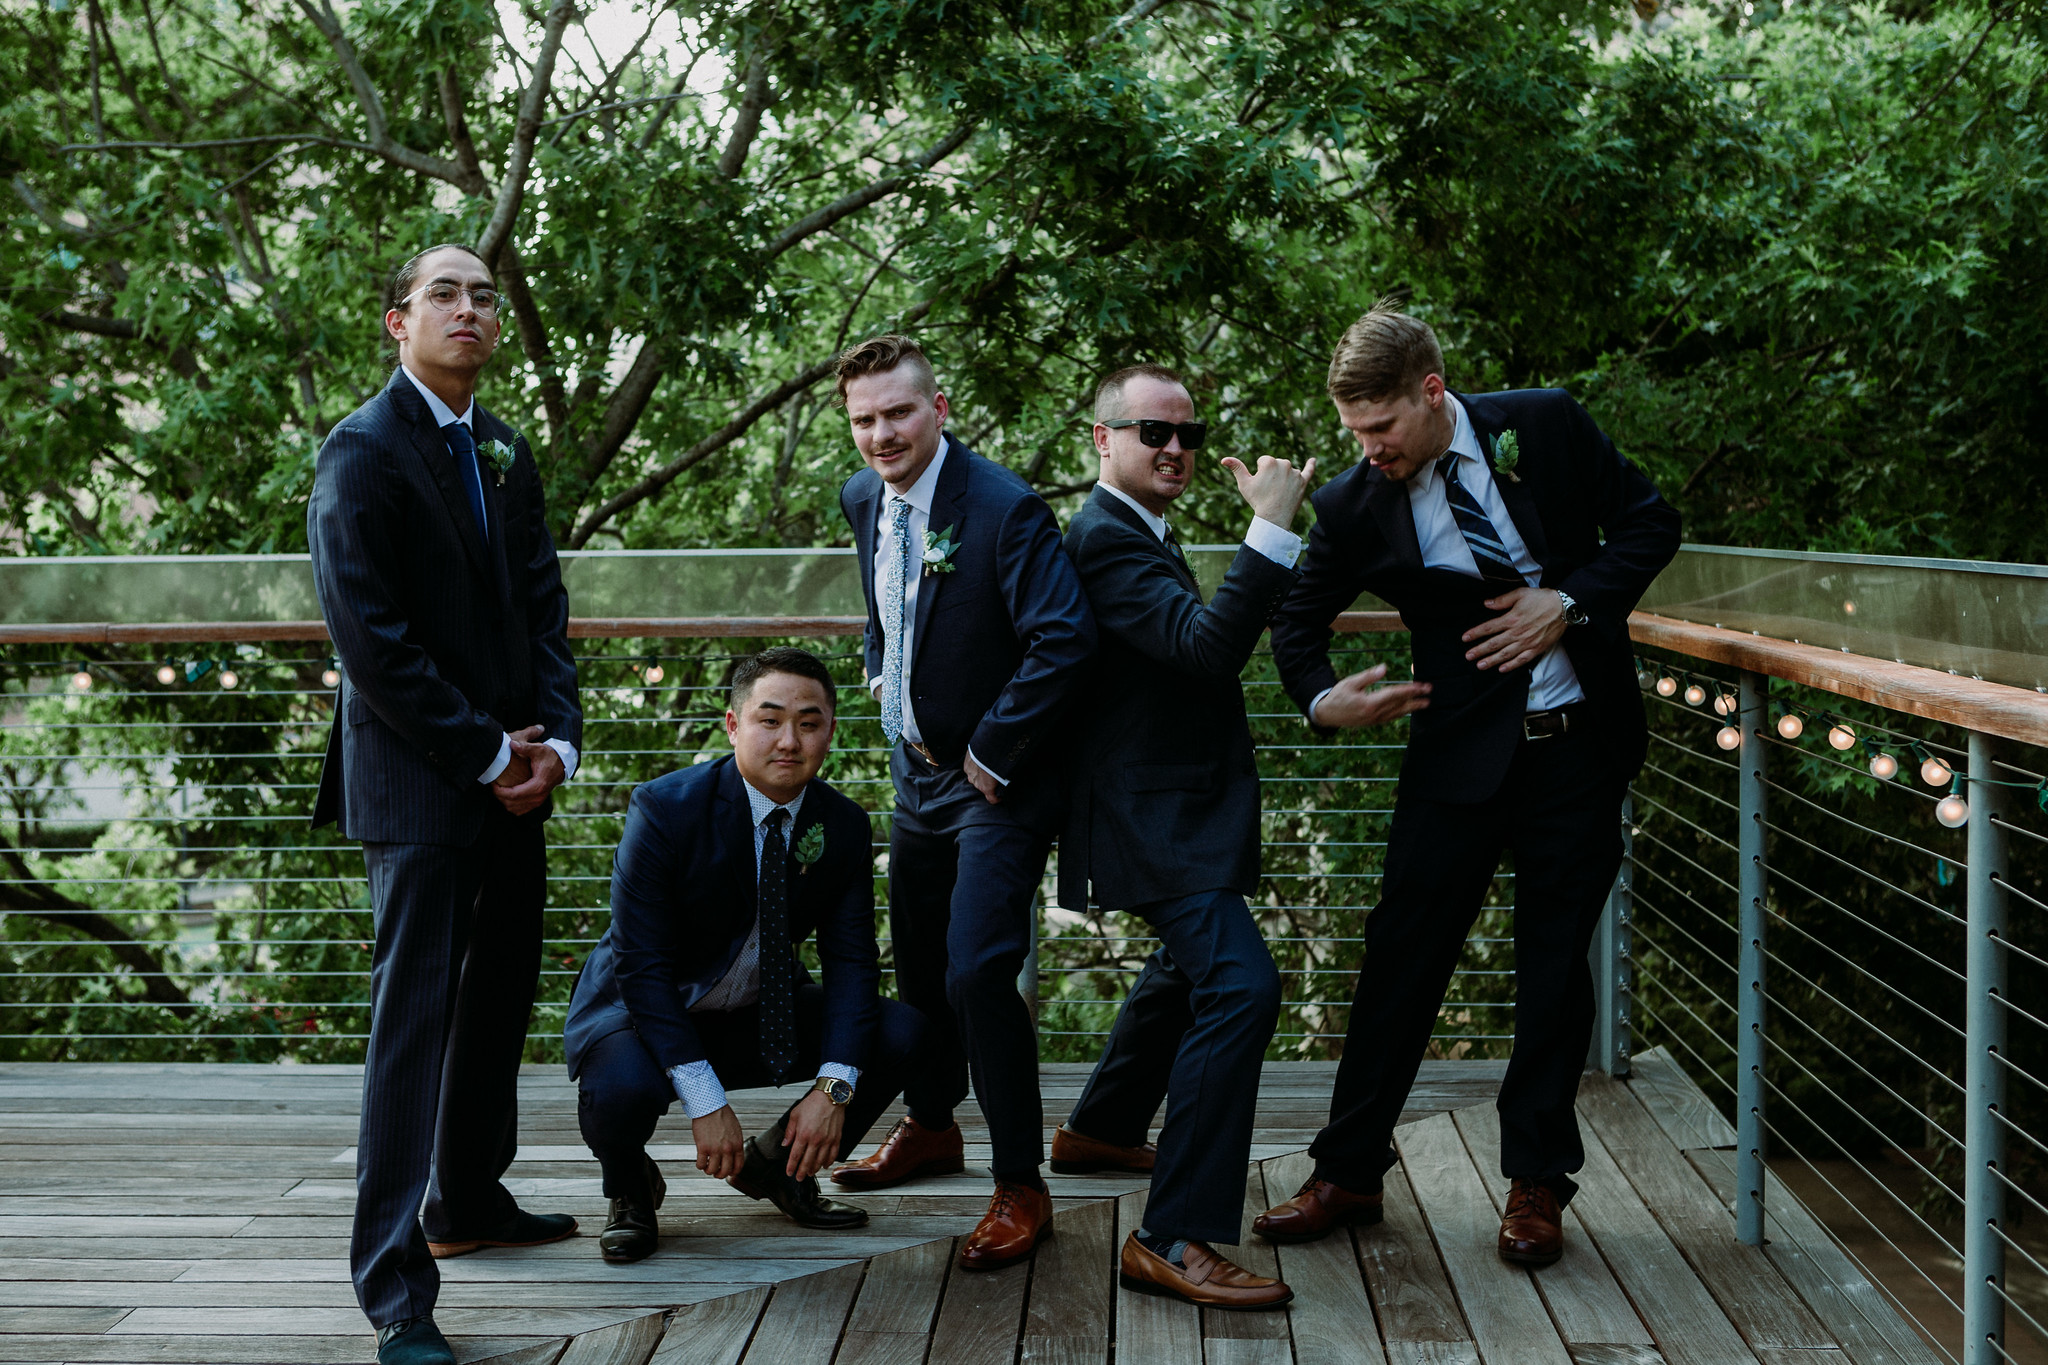 Groom and groomsmen group portraits. Wedding at The Grove at Discovery Green Park (Houston, TX)